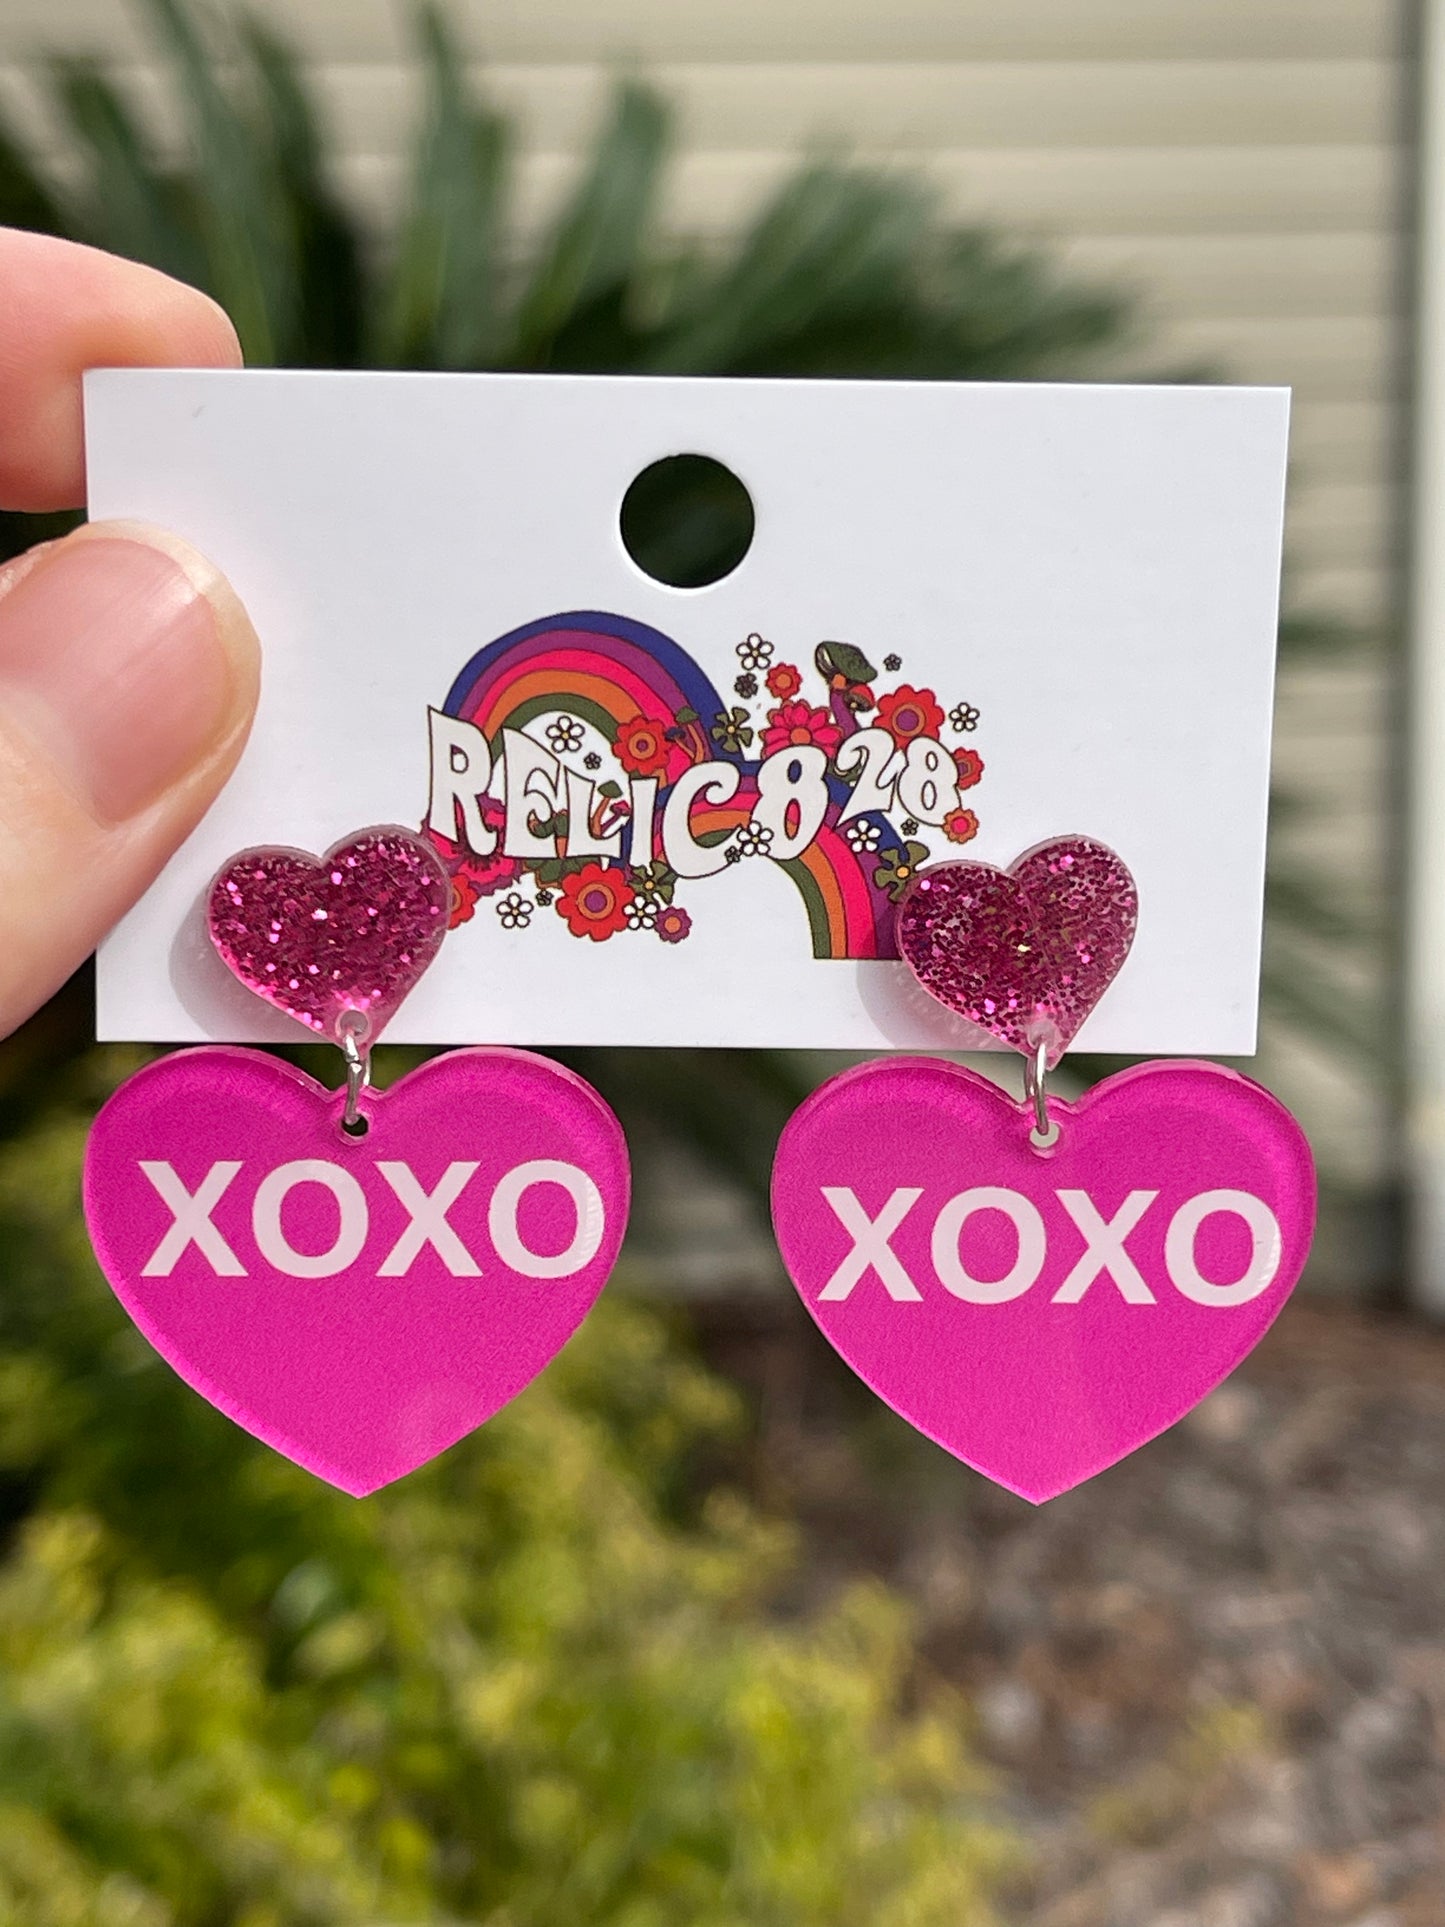 XOXO Valentine Sweet Hearts Candy Colorful Heart Earrings